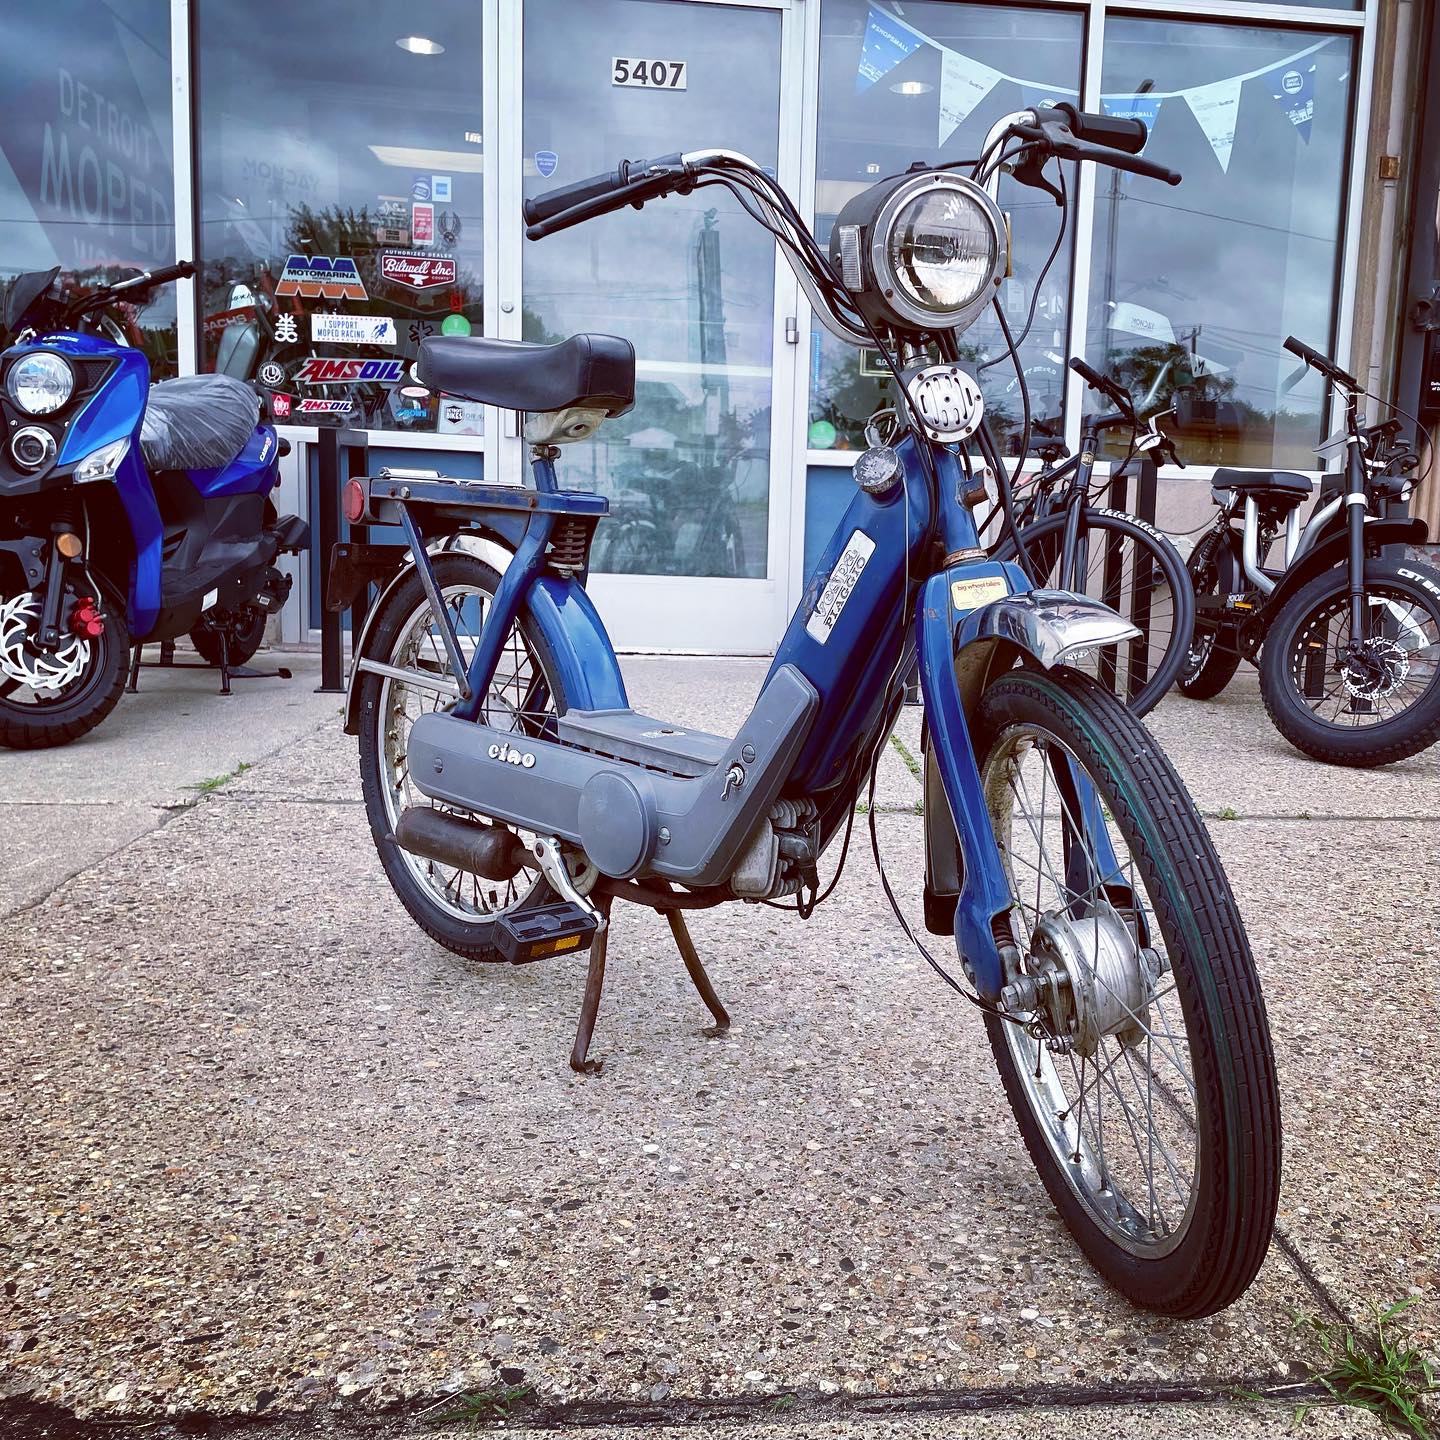 I finally done the restoration of my Piaggio Ciao px 50 : r/motorcycle